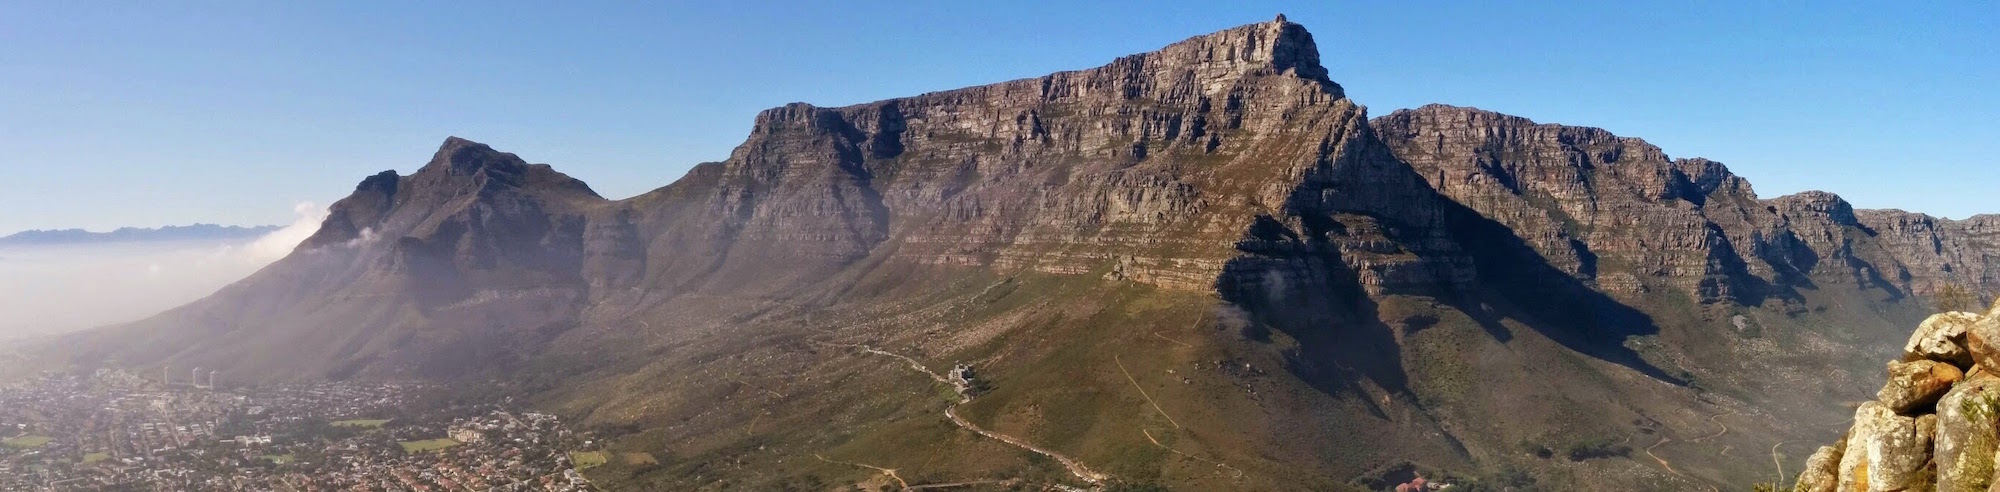 Table Mountain, Cape Town, South Africa. Taken from Lion's Head